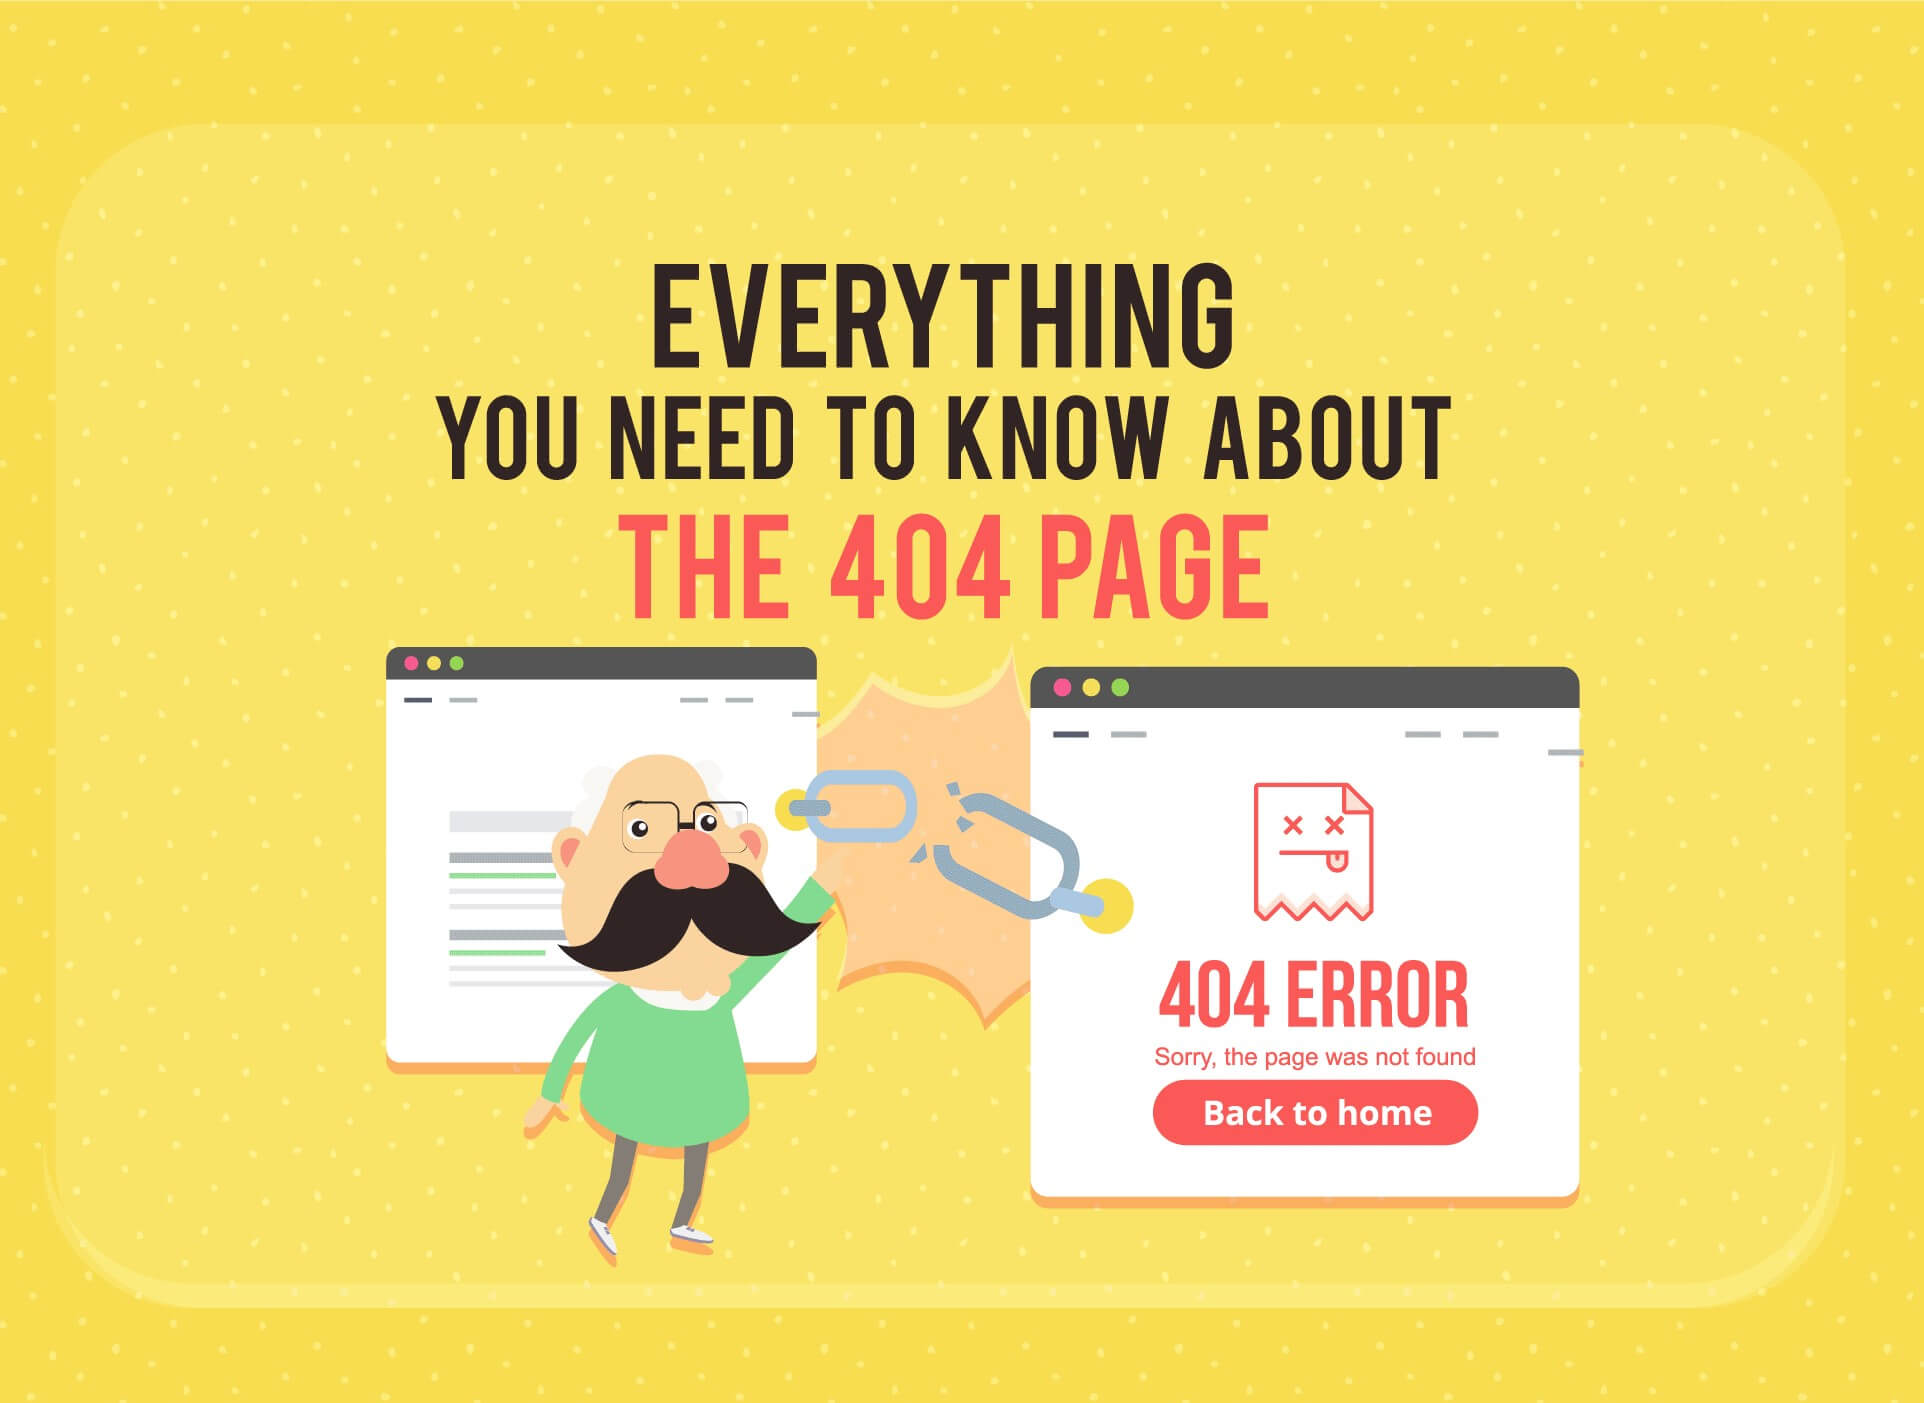 Header image for the infographic about the 404 error page